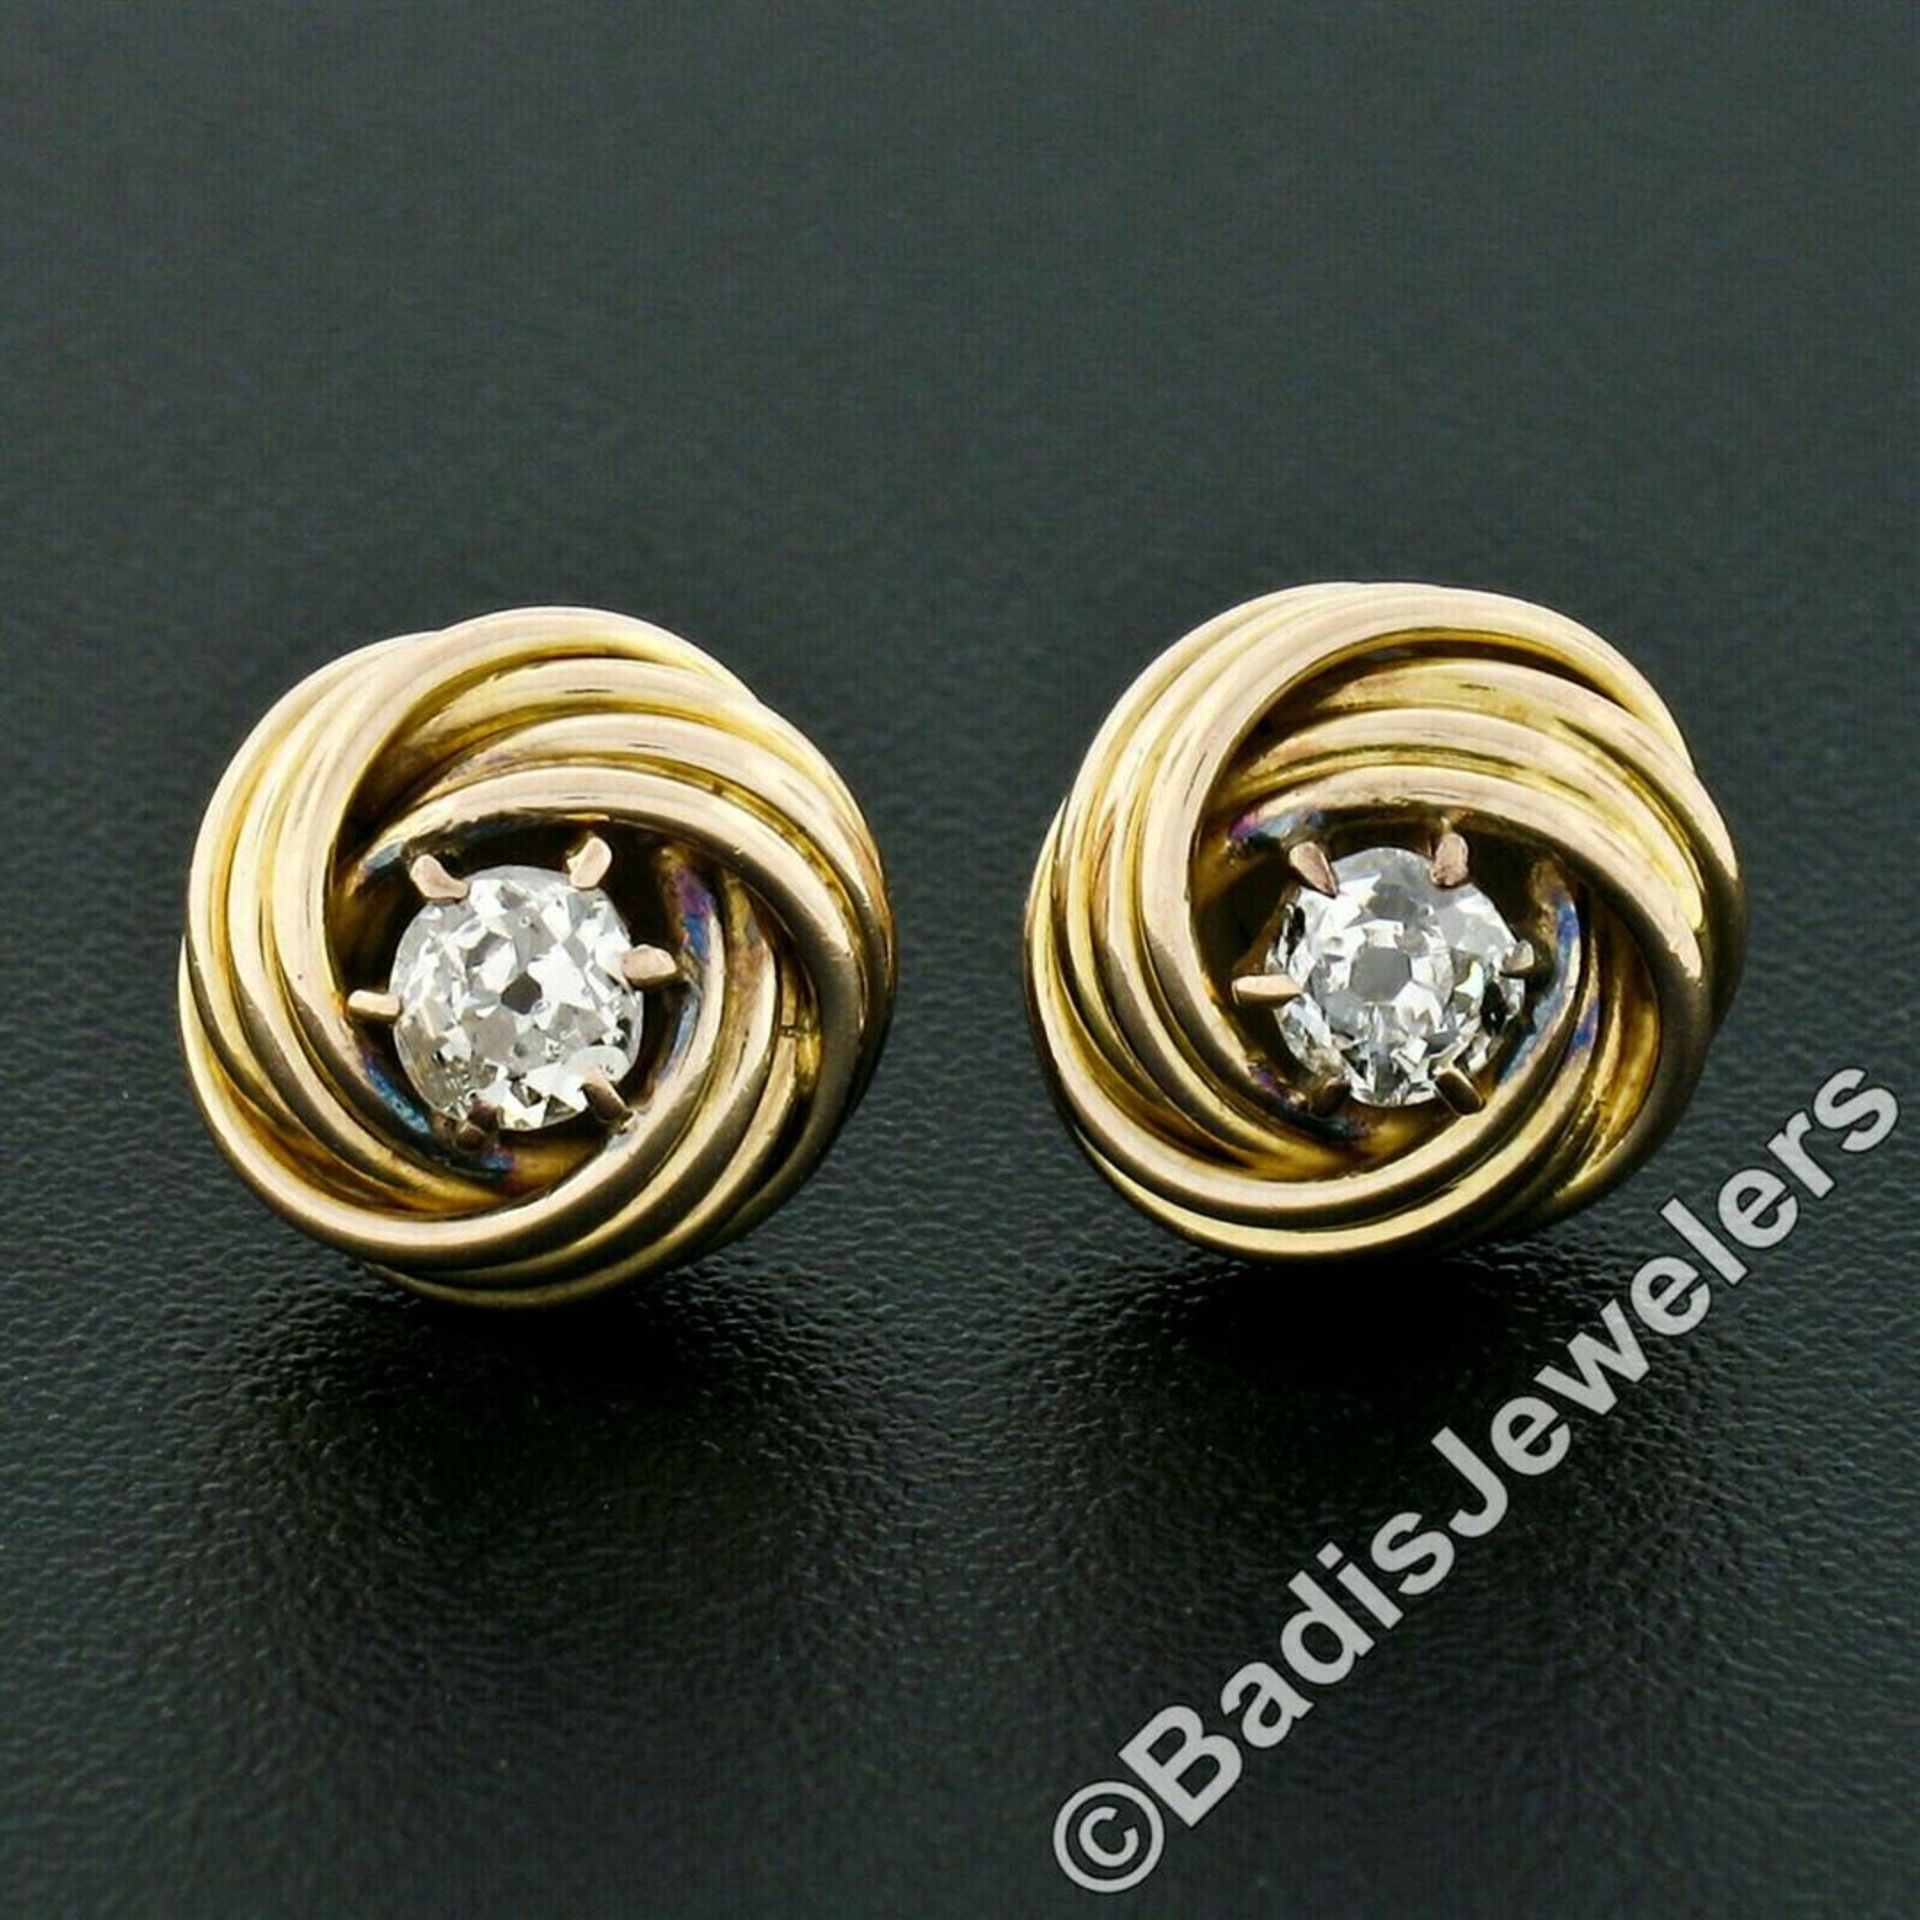 Victorian 14kt Yellow Gold 0.36 ctw Old Mine Cut Diamond Love Knot Stud Earrings - Image 2 of 5